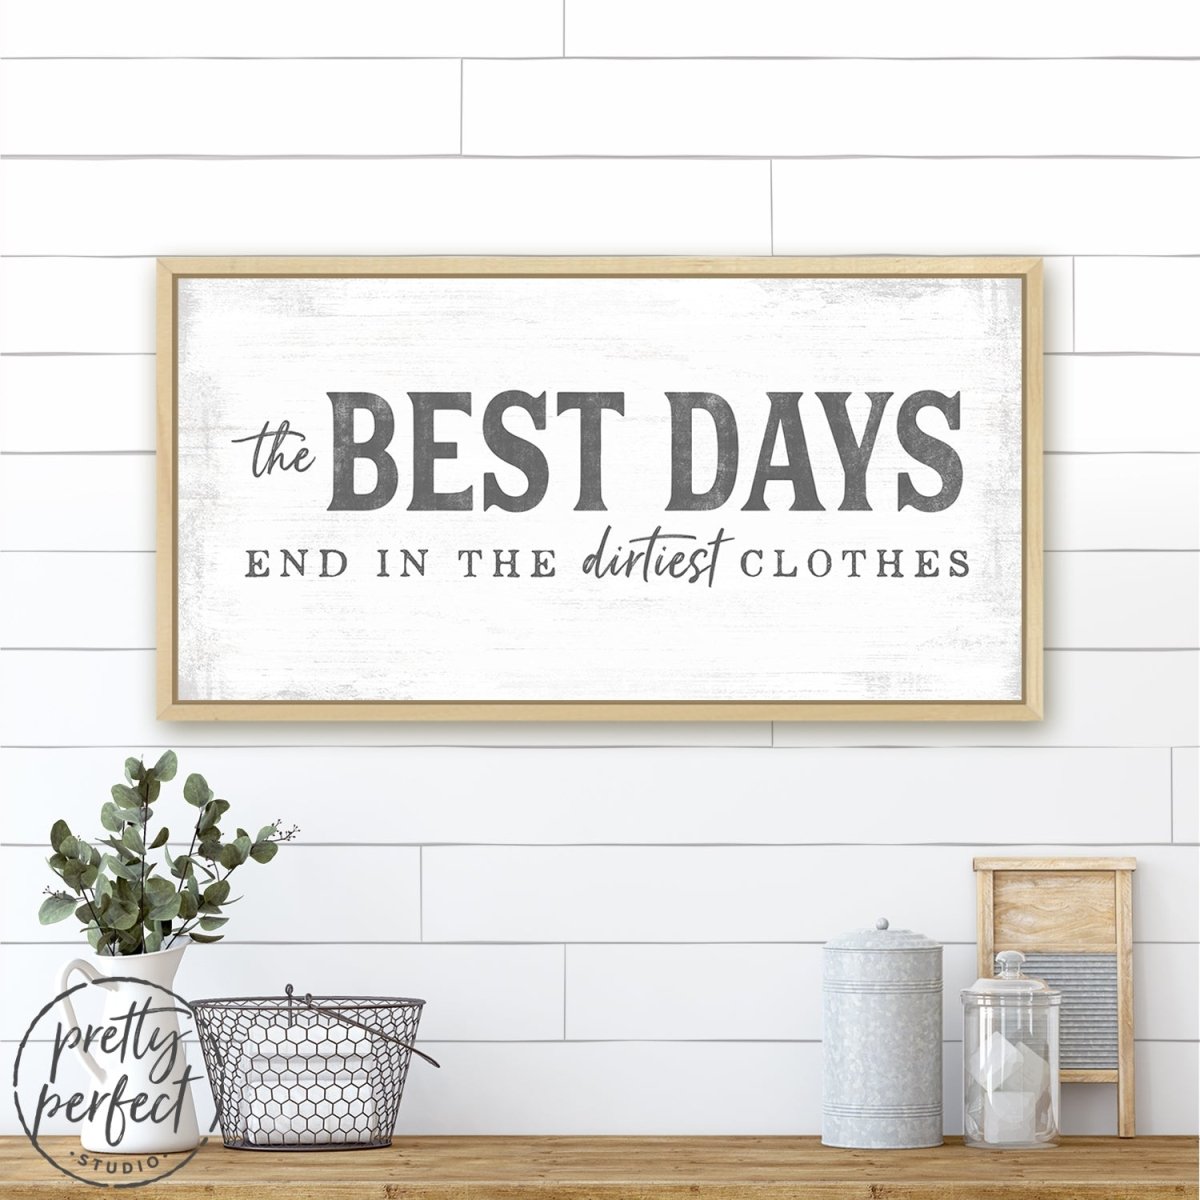 The Best Days End in the Dirtiest Clothes Sign Above Table in Laundry Room - Pretty Perfect Studio